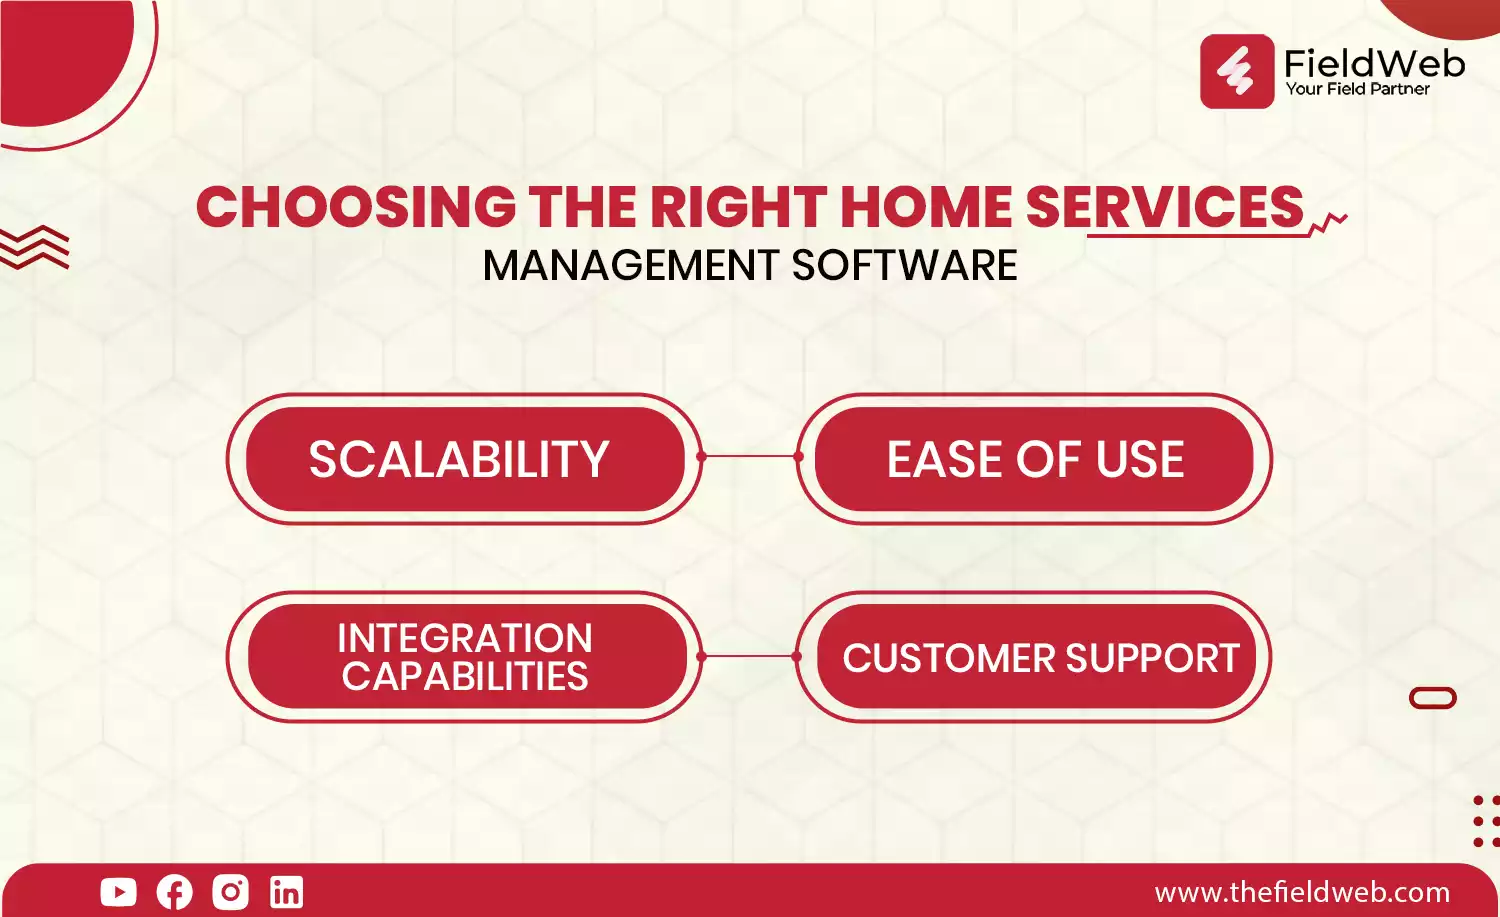 image is displaying 4 right home services management software